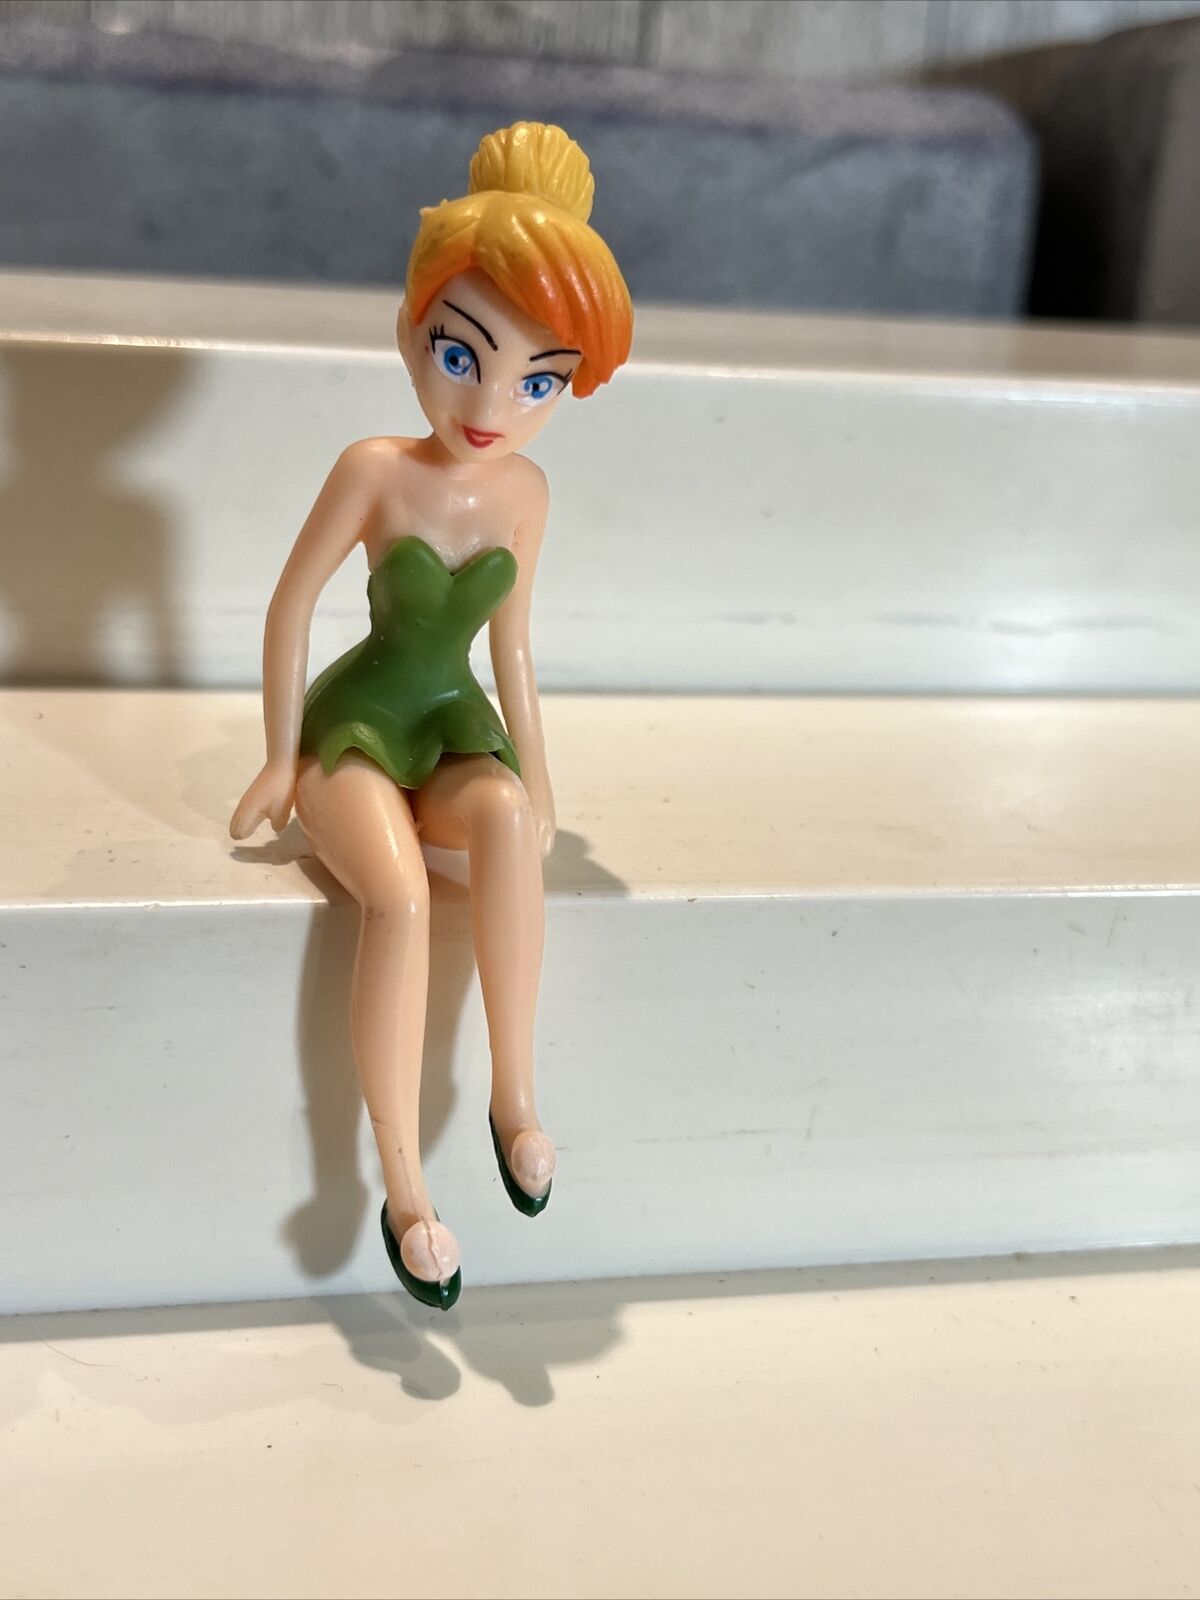 OOPS Naughty Tinker Bell Forgot To Wear Panties Semi Naked